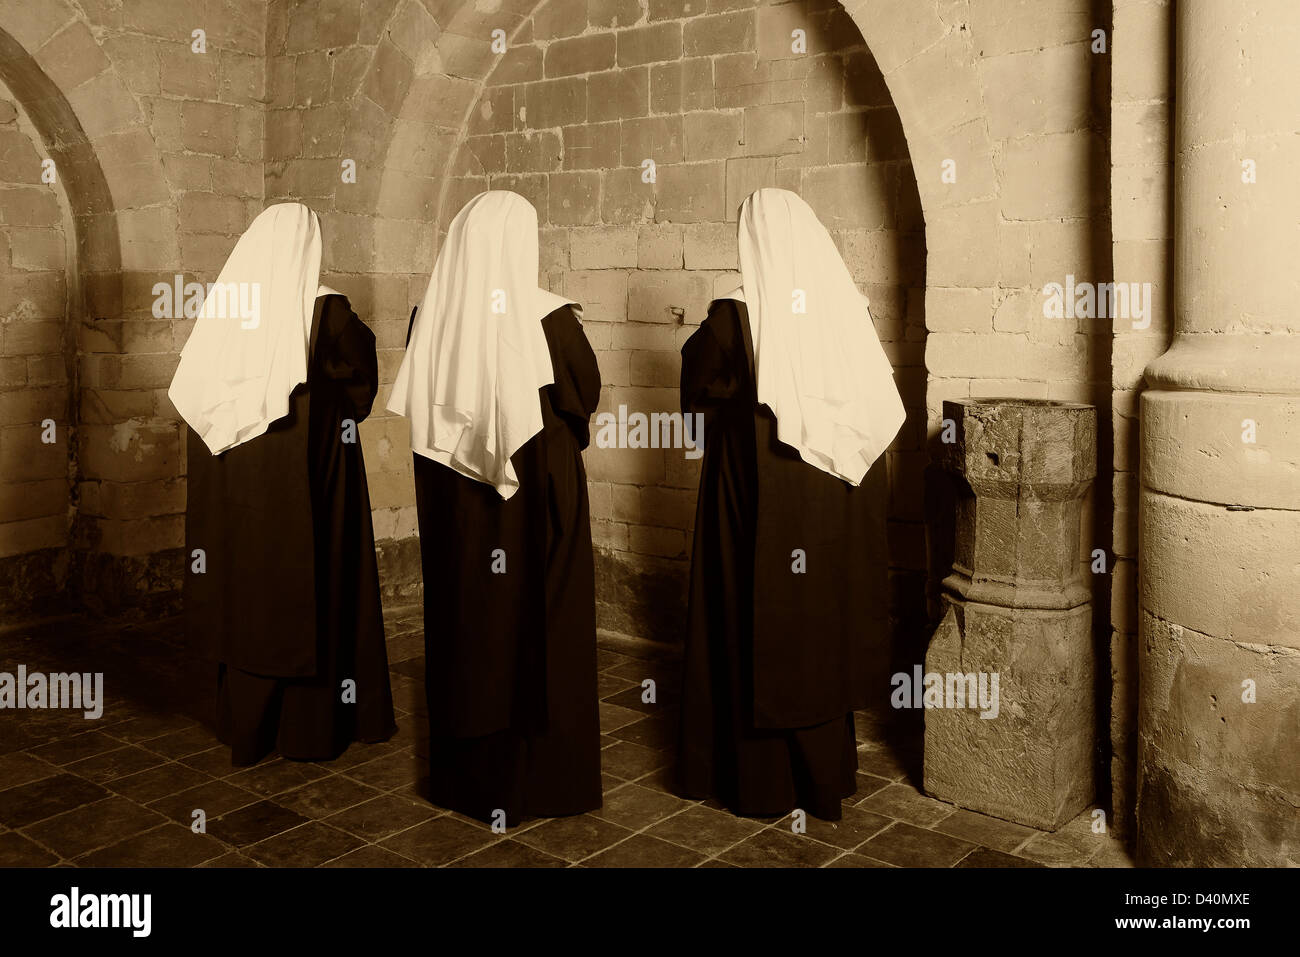 Three nuns in habit standing in a medieval abbey Stock Photo